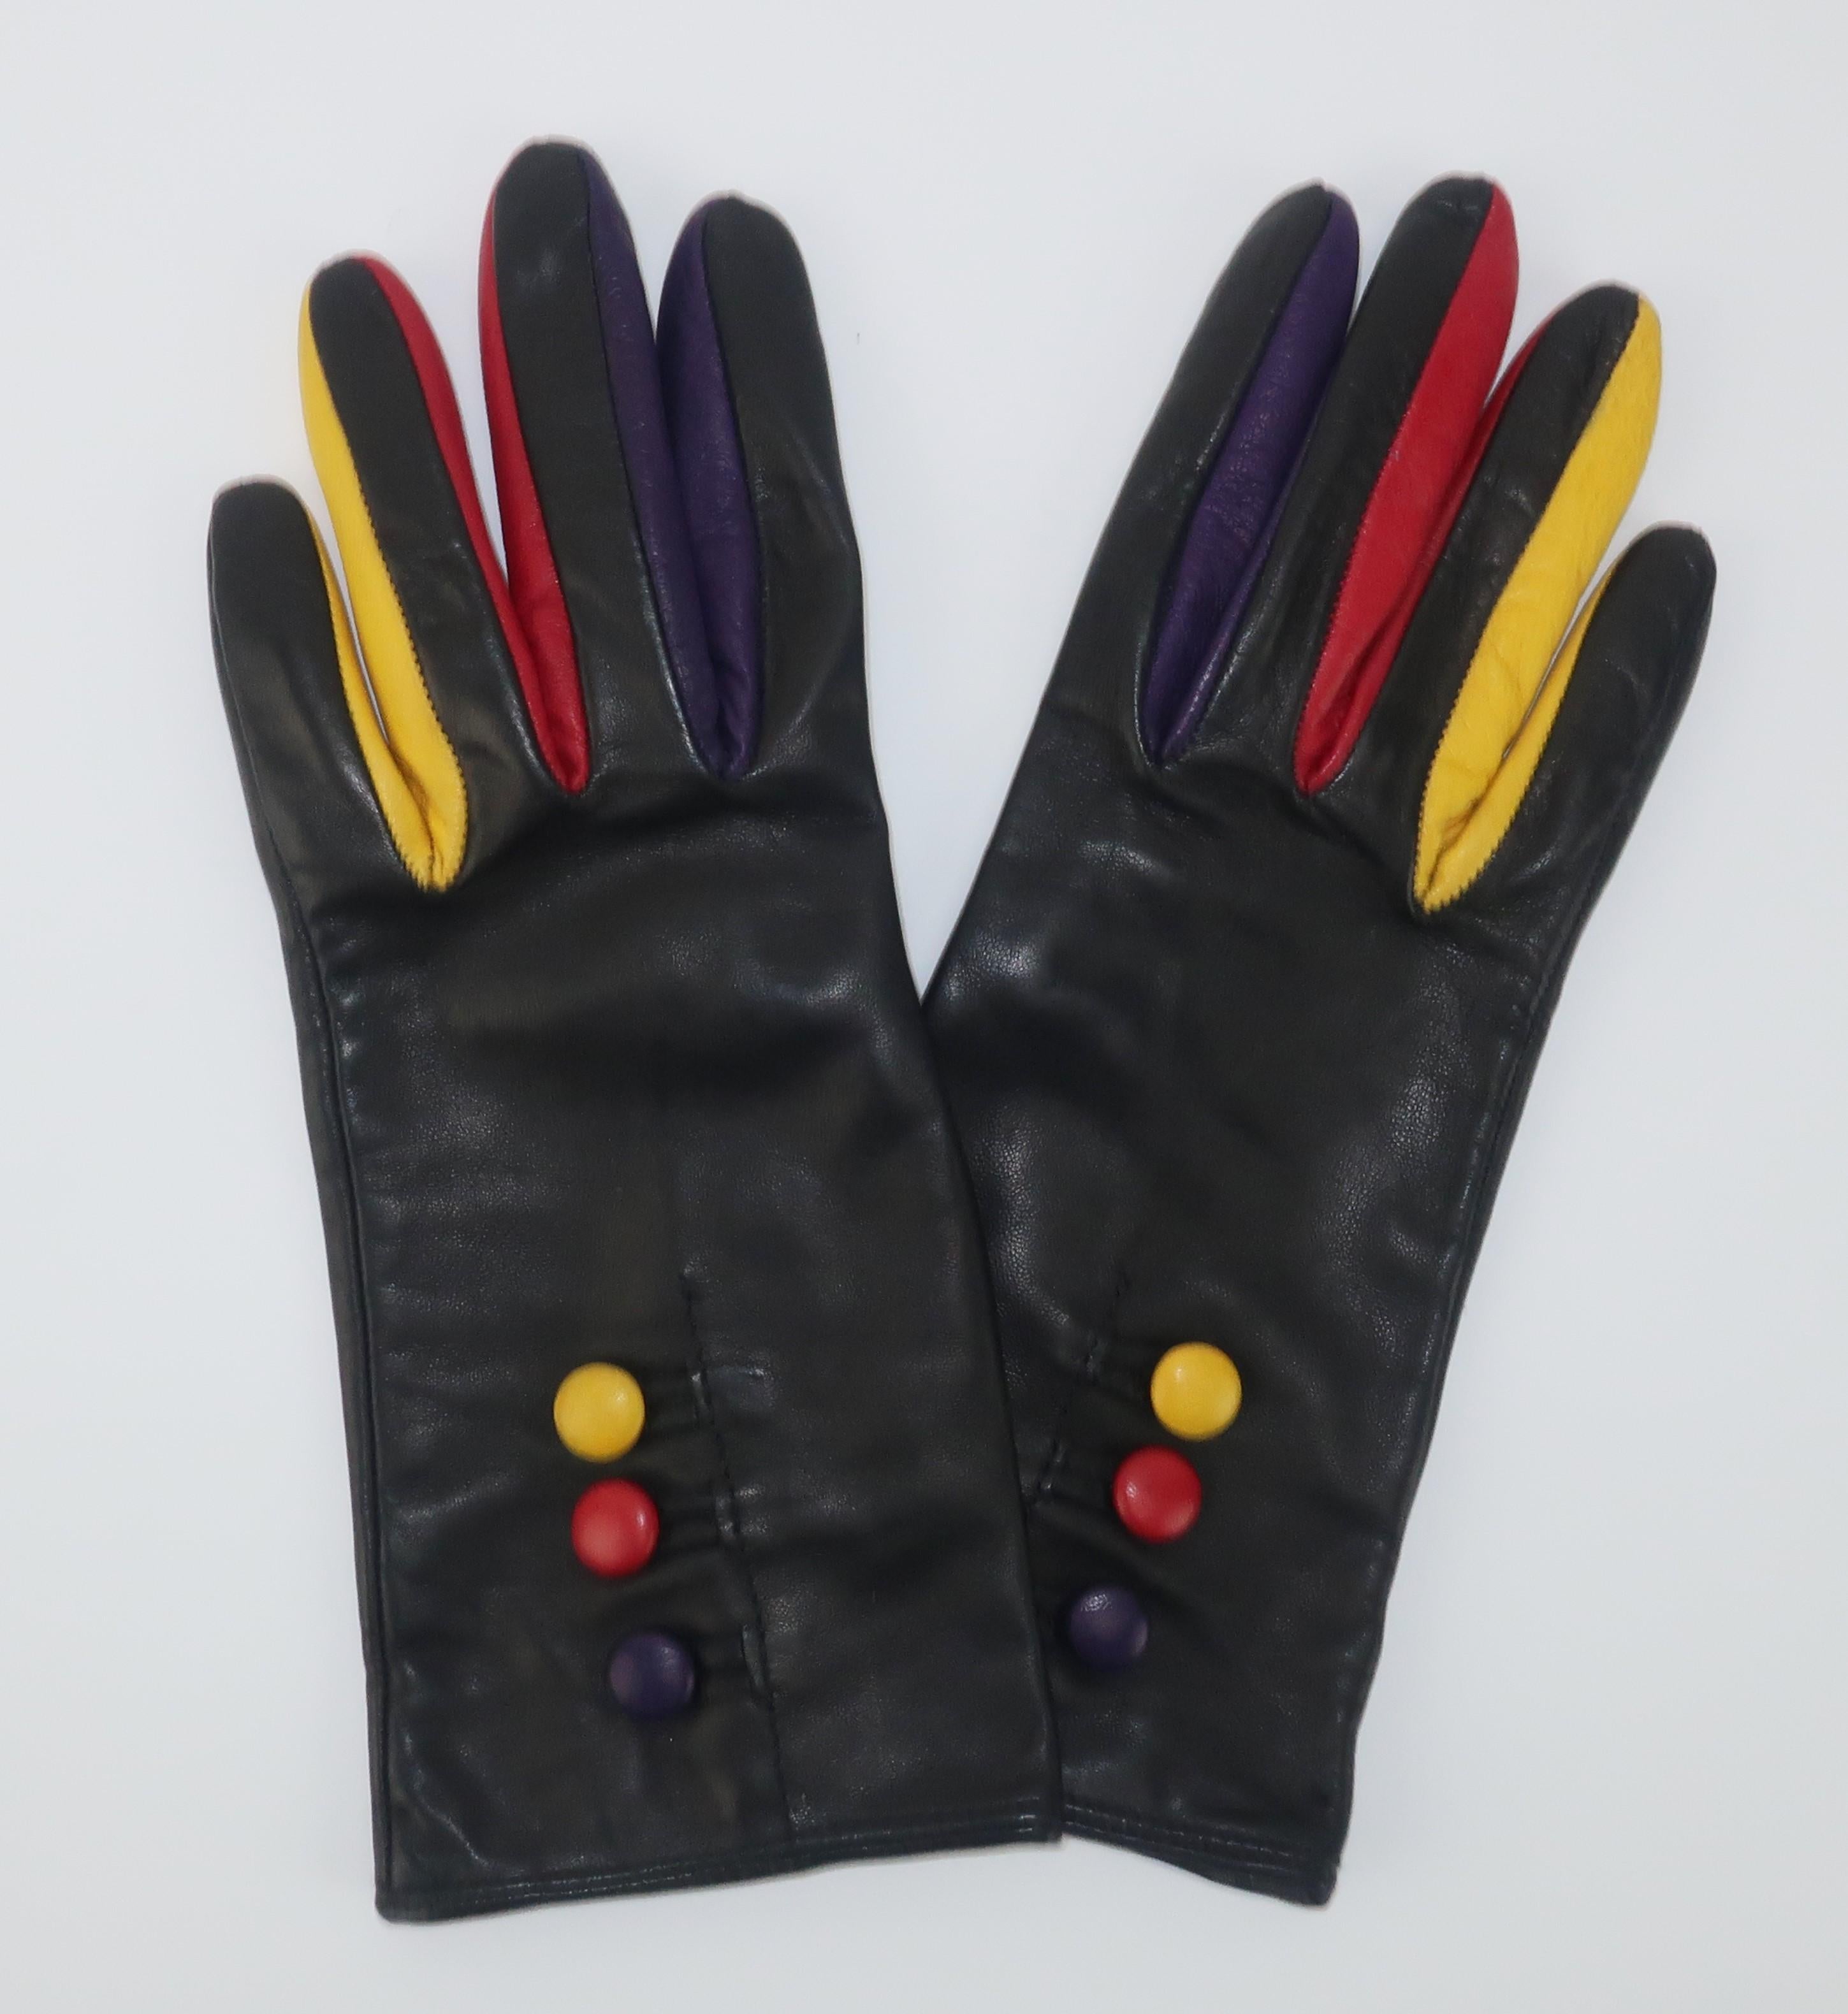 Sergio Di Cori Italian black leather gloves accented by purple, red and yellow leather inserts between the fingers and buttons at the cuffs.  Lined in a soft lightweight wool and finished with a vent at the cuffs.  From the Atlanta estate of